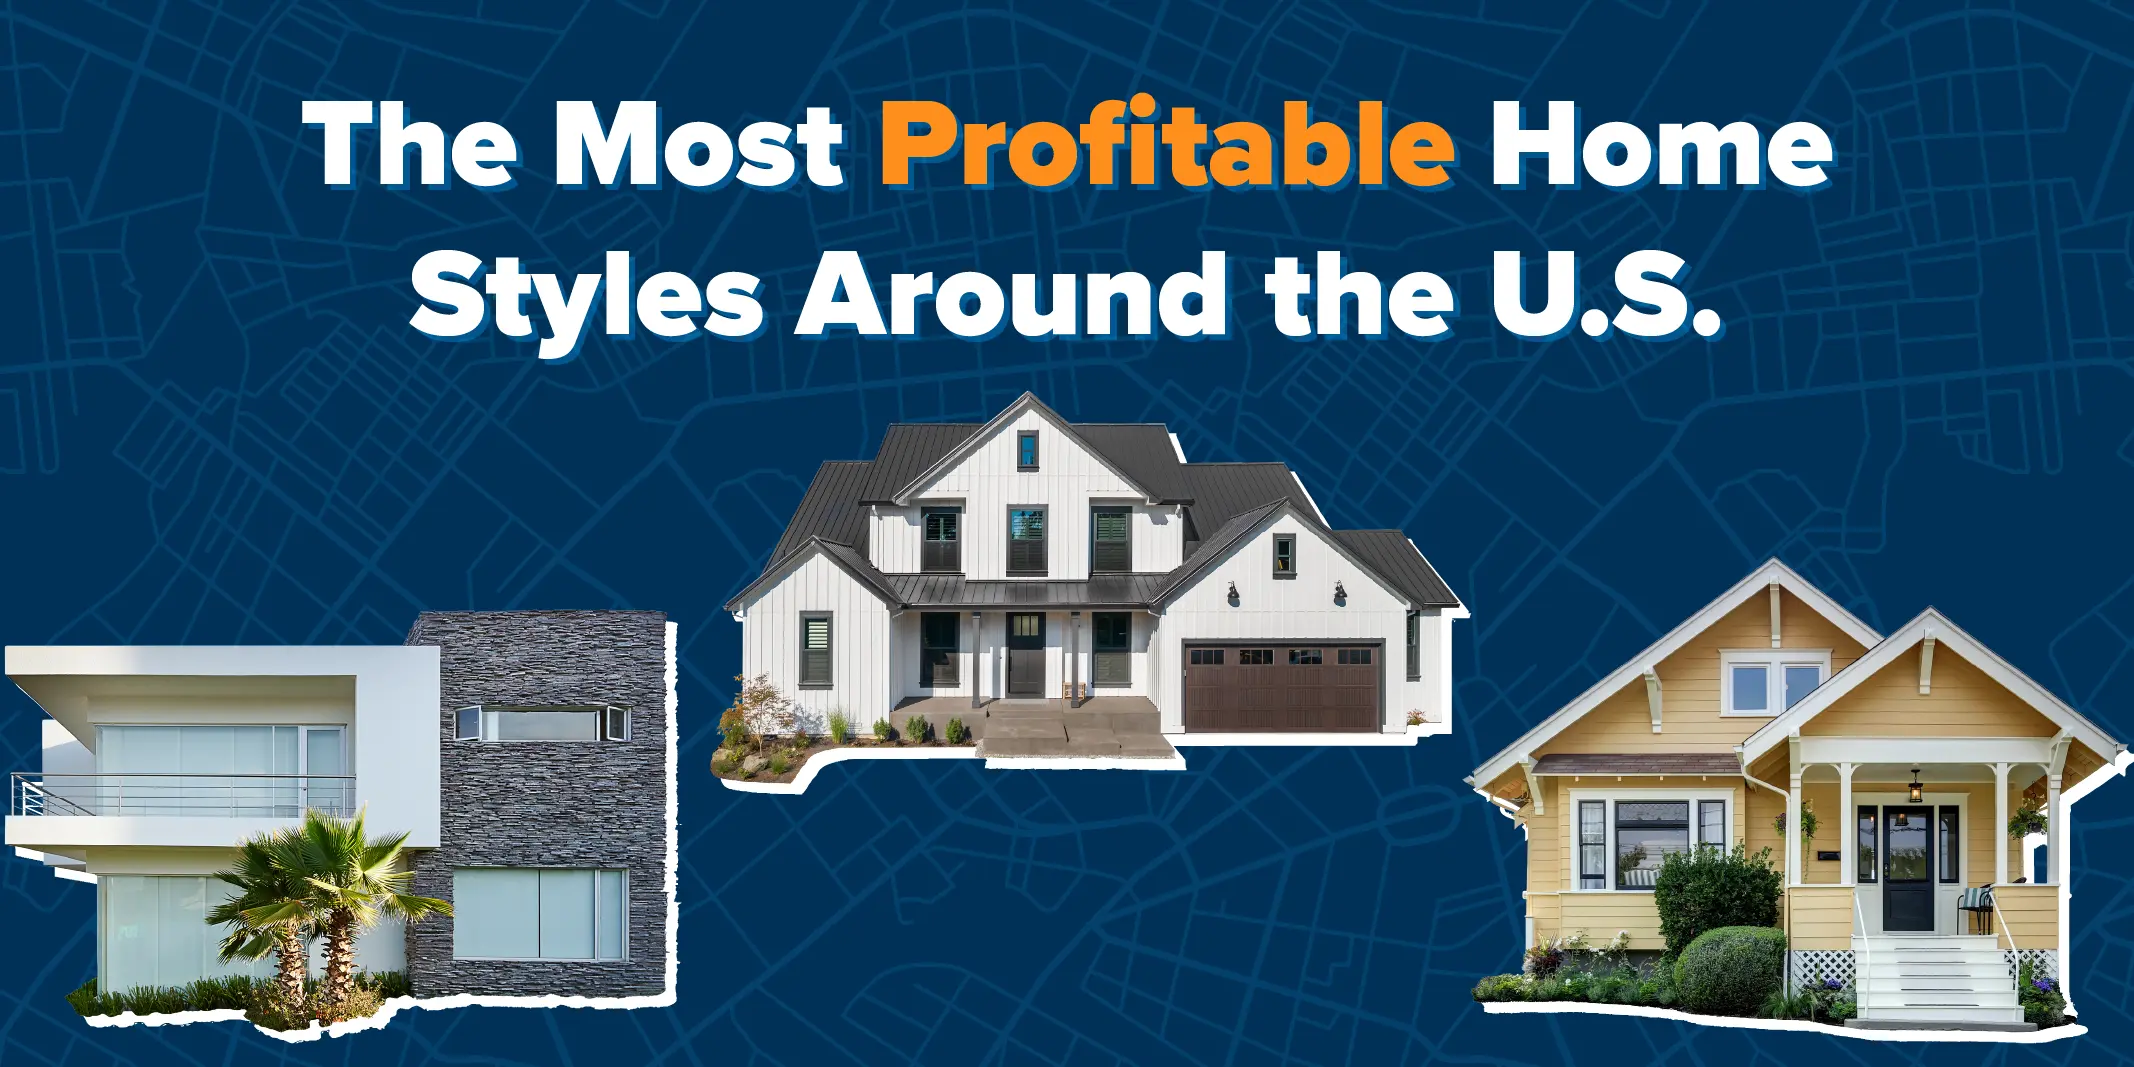 Introductory graphic for a blog about the most profitable home styles around the U.S.